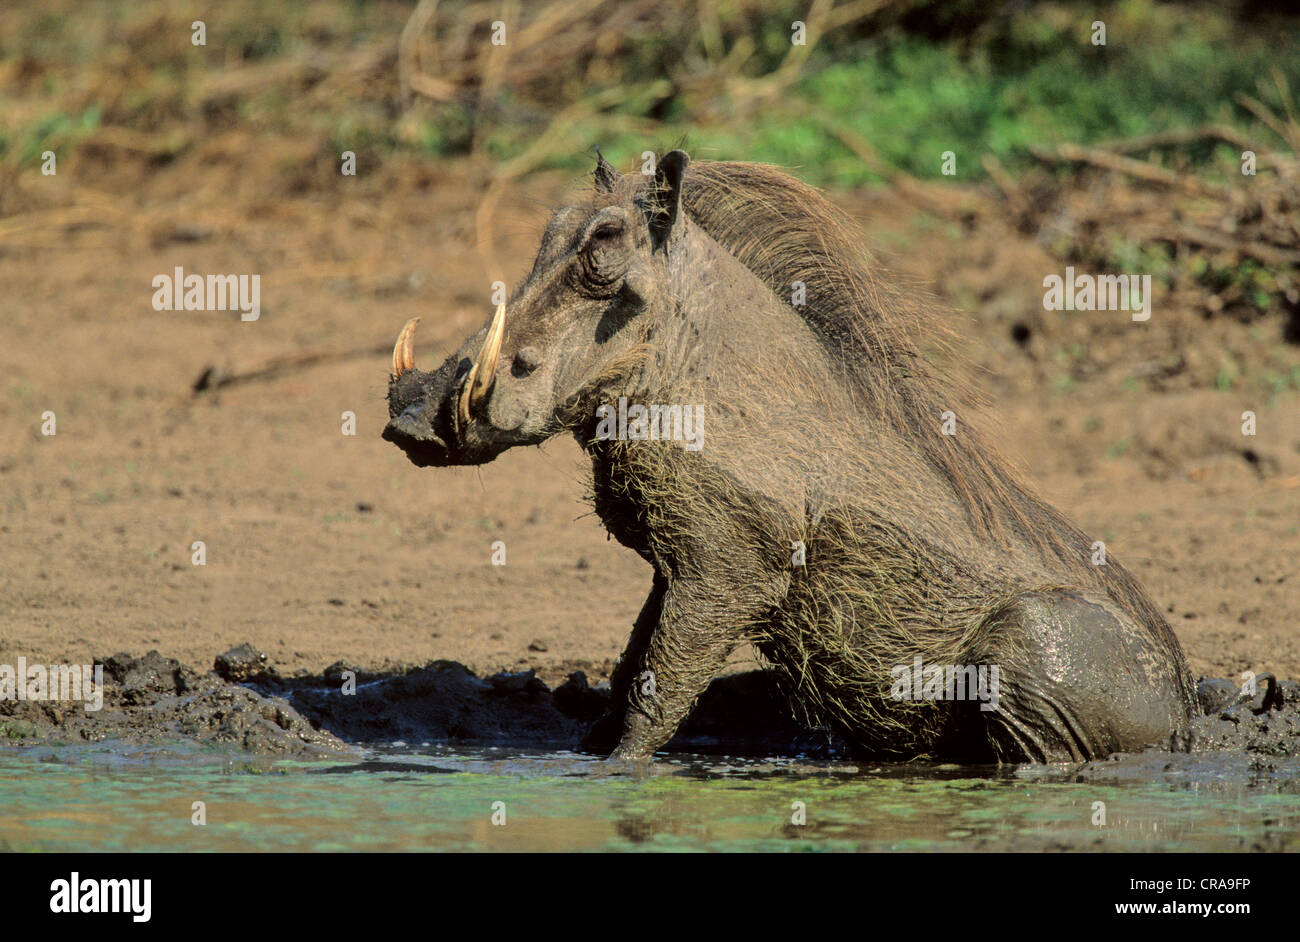 Desert Warthog (Phacochoerus aethiopicus), wallowing, Kruger National Park, South Africa, Africa Stock Photo